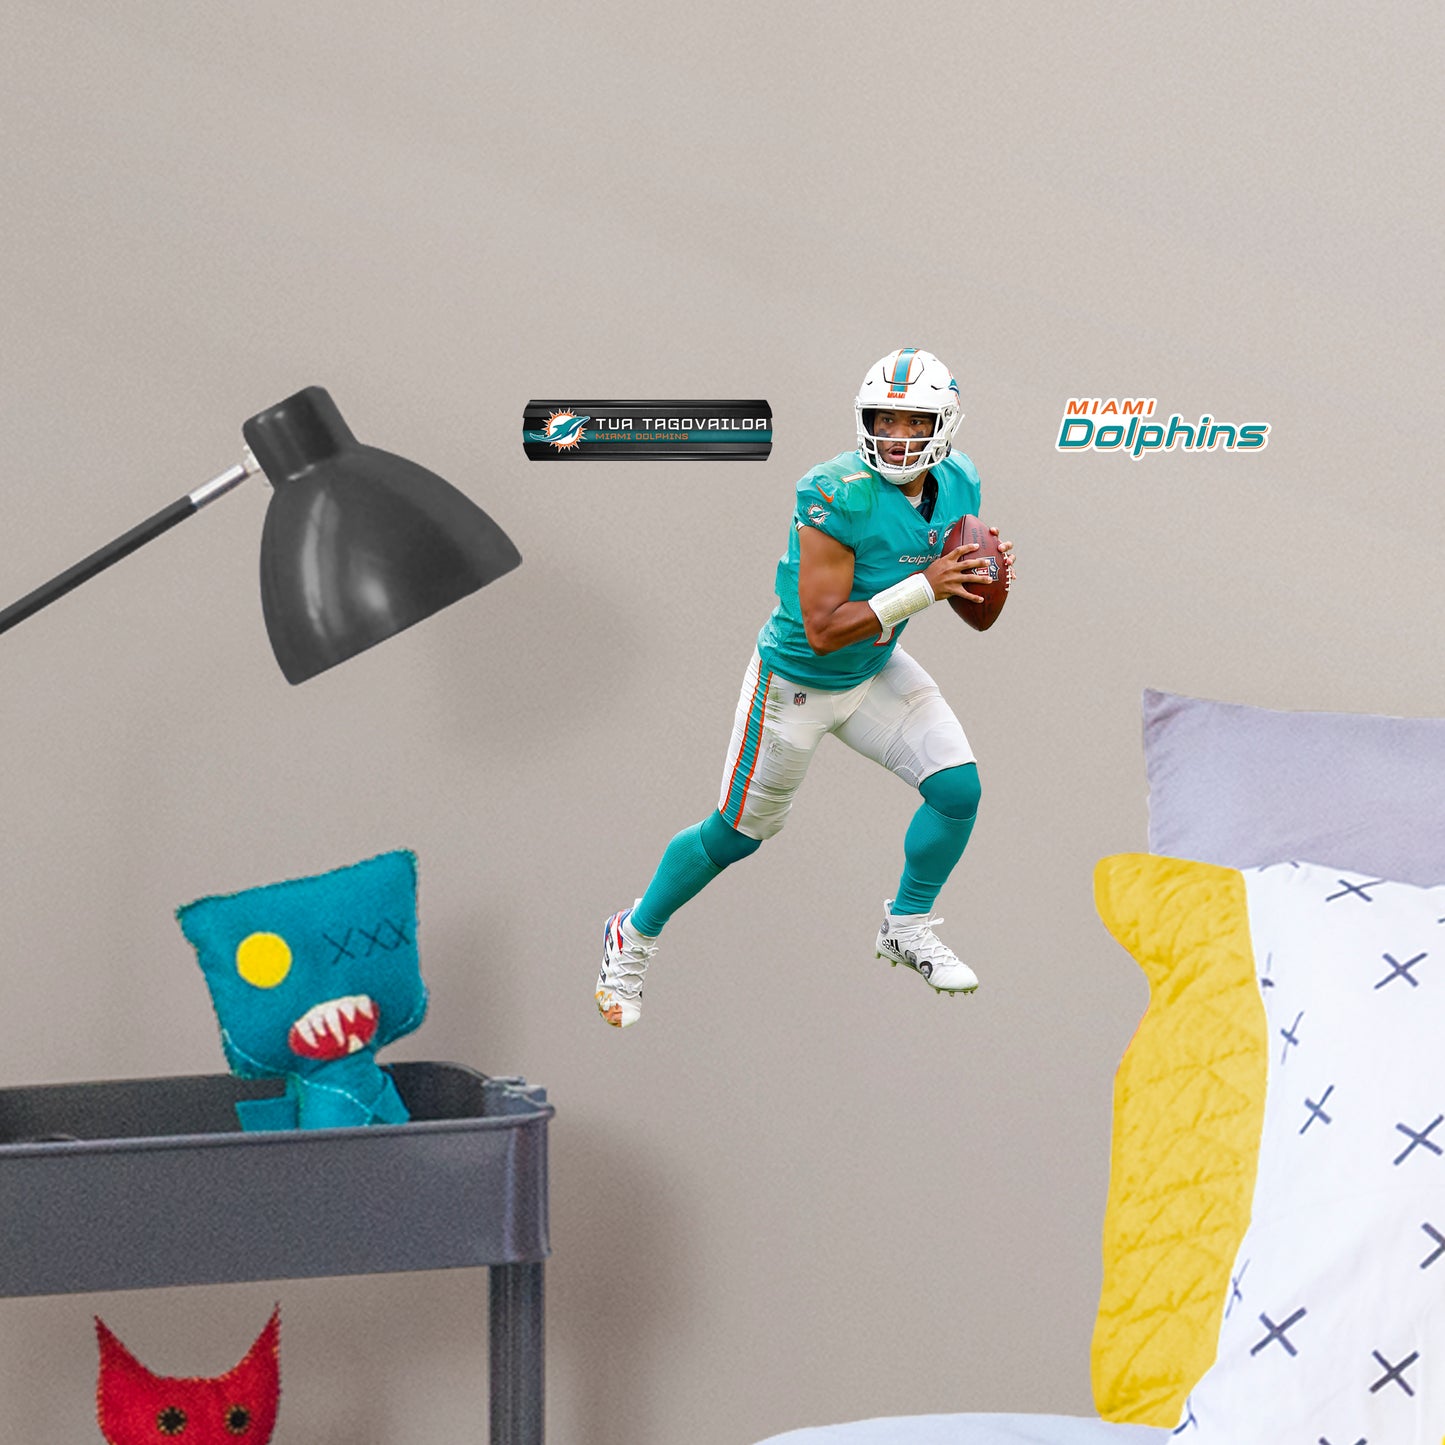 Large Athlete + 2 Decals (10"W x 16"H) Bring the action of the NFL into your home with a wall decal of Tua Tagovailoa! High quality, durable, and tear resistant, you'll be able to stick and move it as many times as you want to create the ultimate football experience in any room!